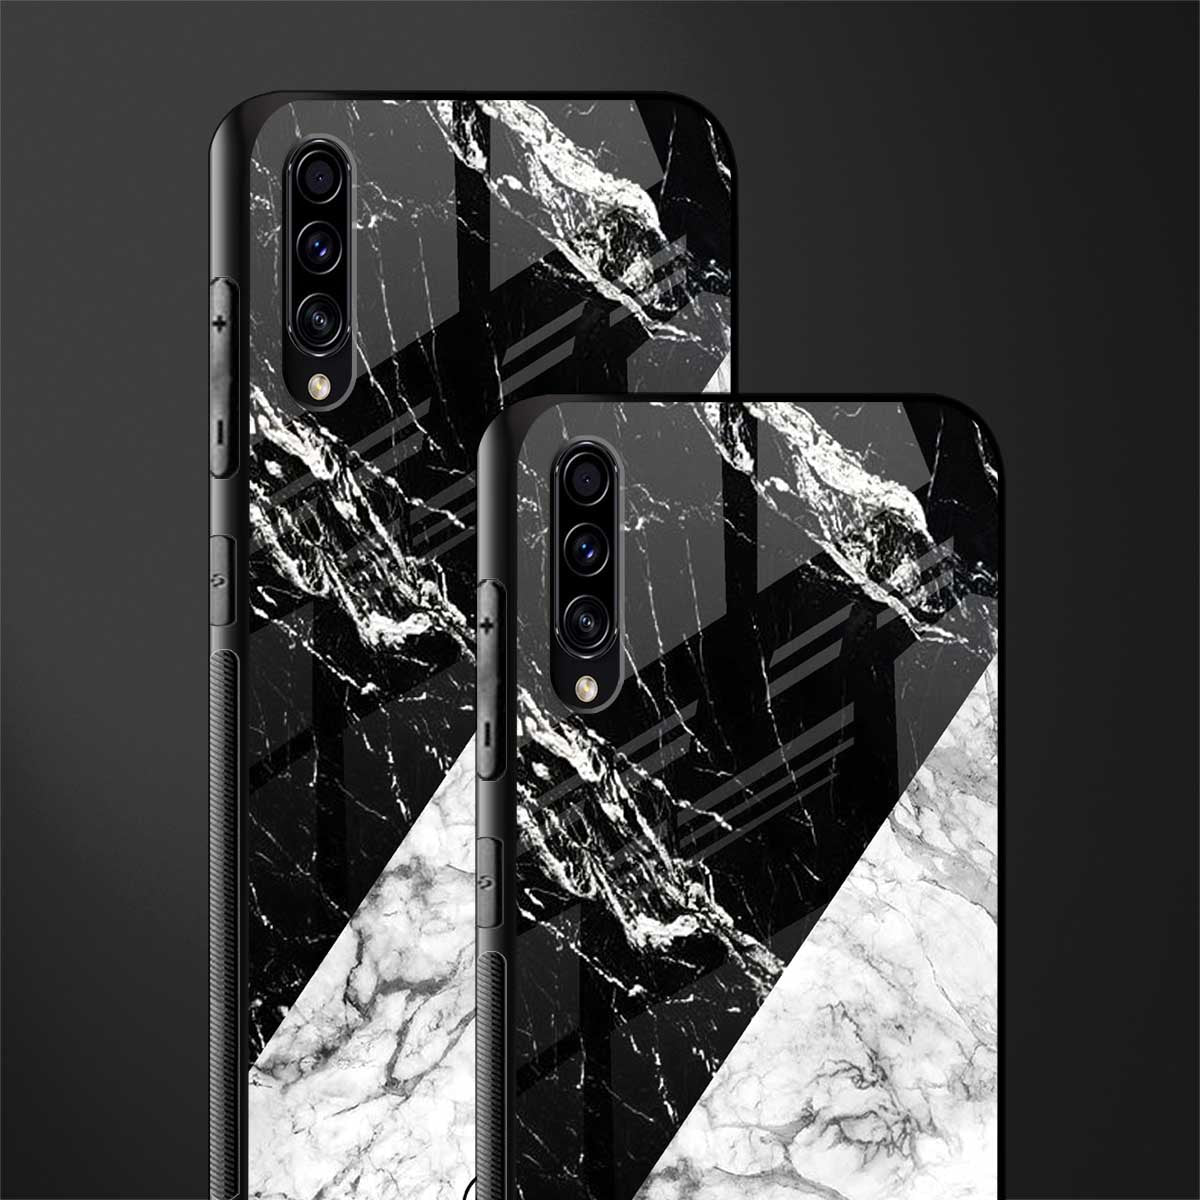 fatal contradiction phone cover for samsung galaxy a70